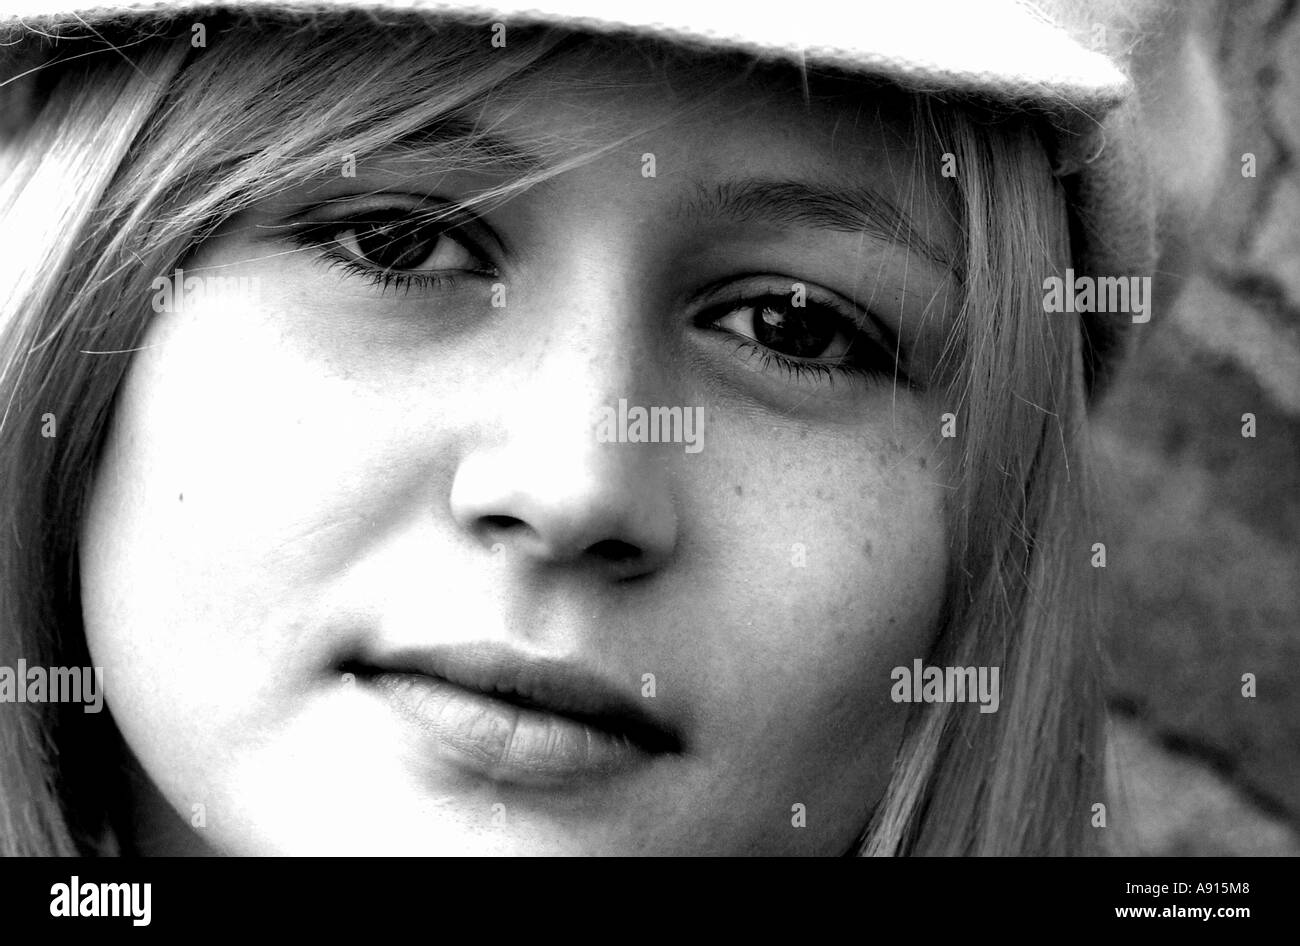 Close up horizontal portrait in black and white, of face of pretty young blonde haired girl wearing hat Stock Photo